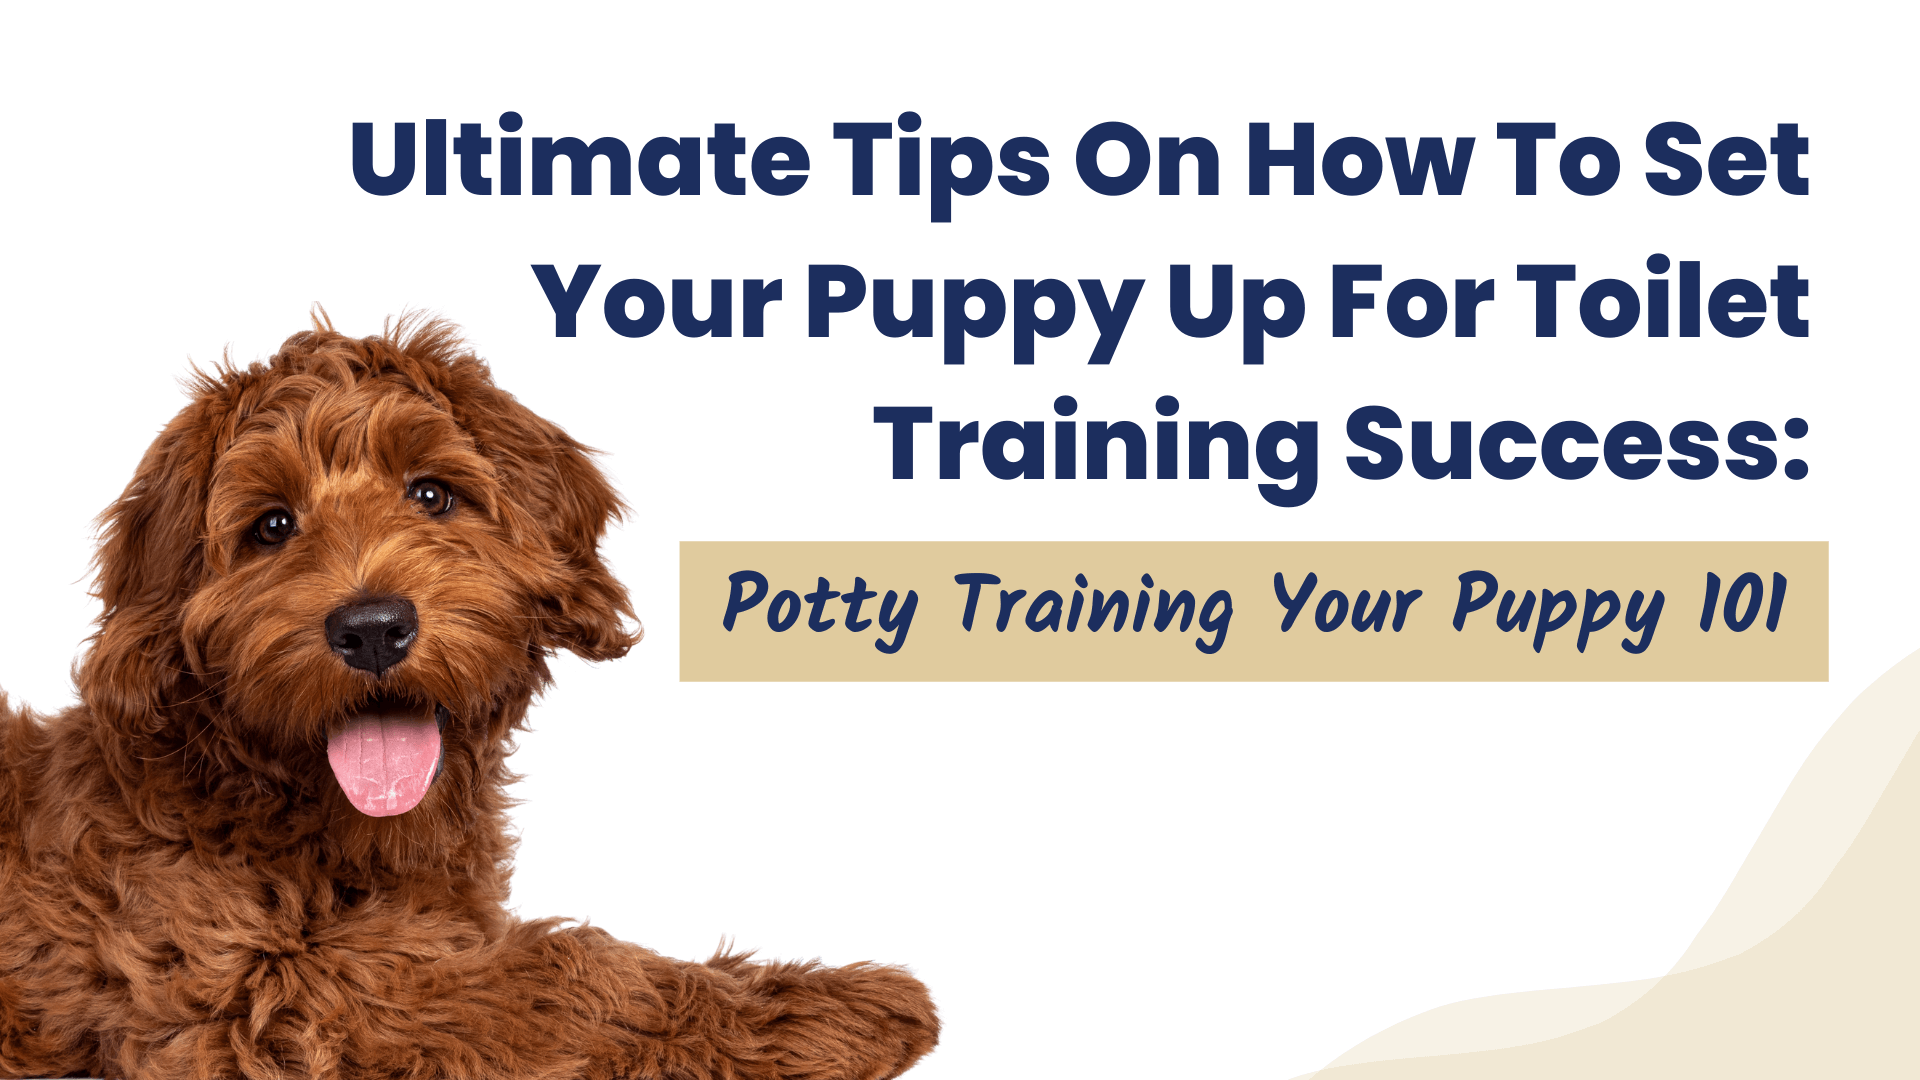 potty training your puppy